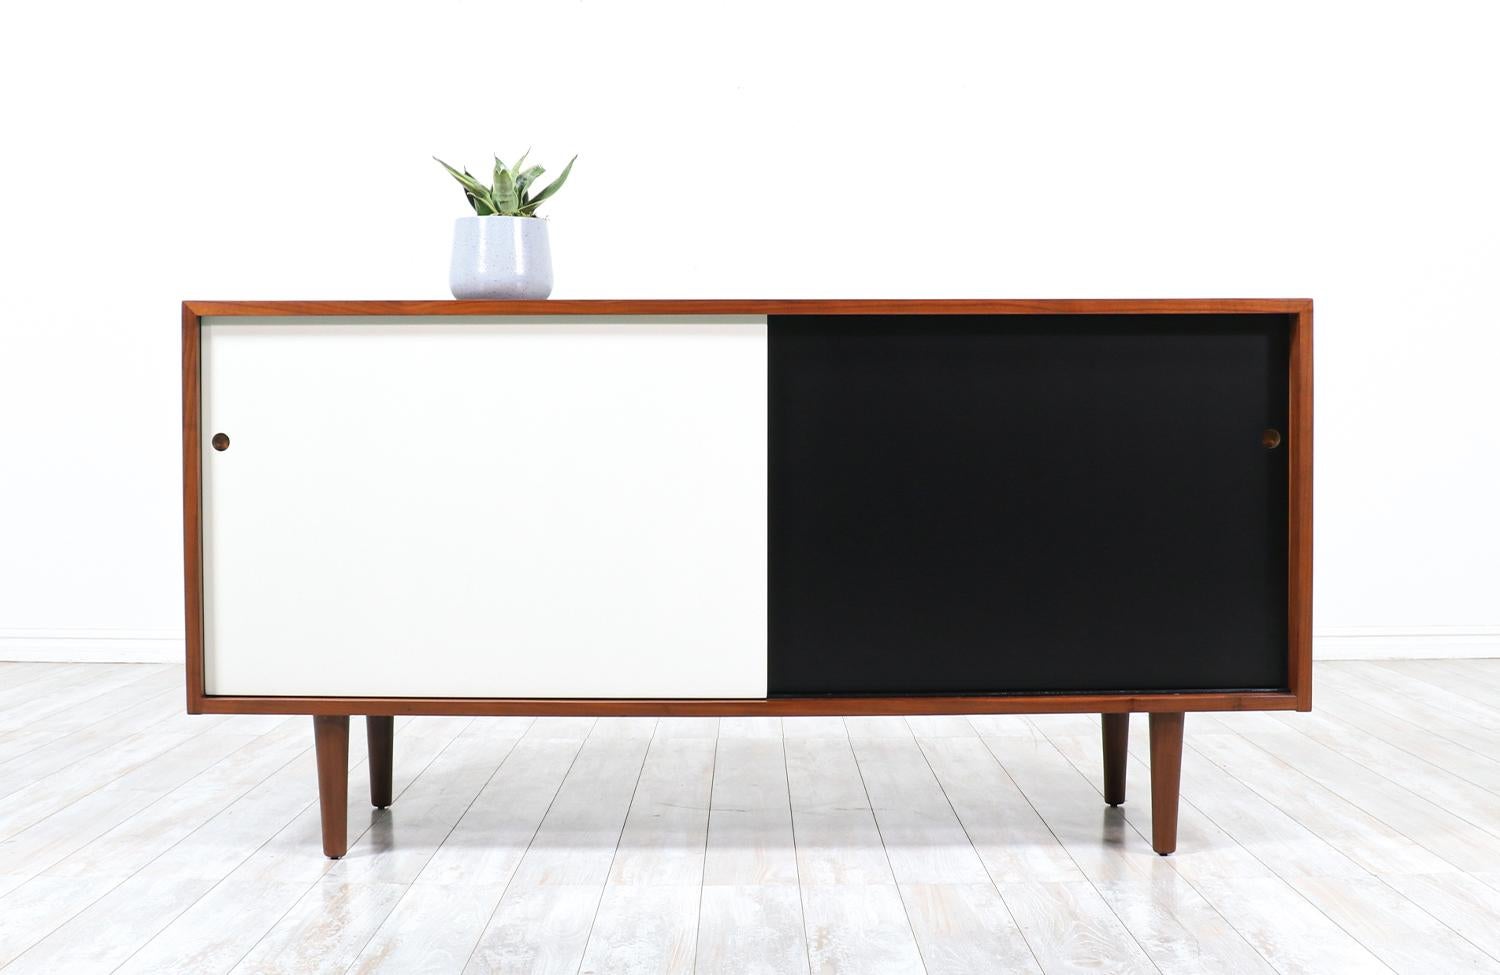 Mid-Century Modern walnut credenza designed by Milo Baughman and manufactured by Glenn of California. circa 1950’s. This compact credenza features two sliding black and white doors with brass pulls that open to reveal a shelved compartment on each